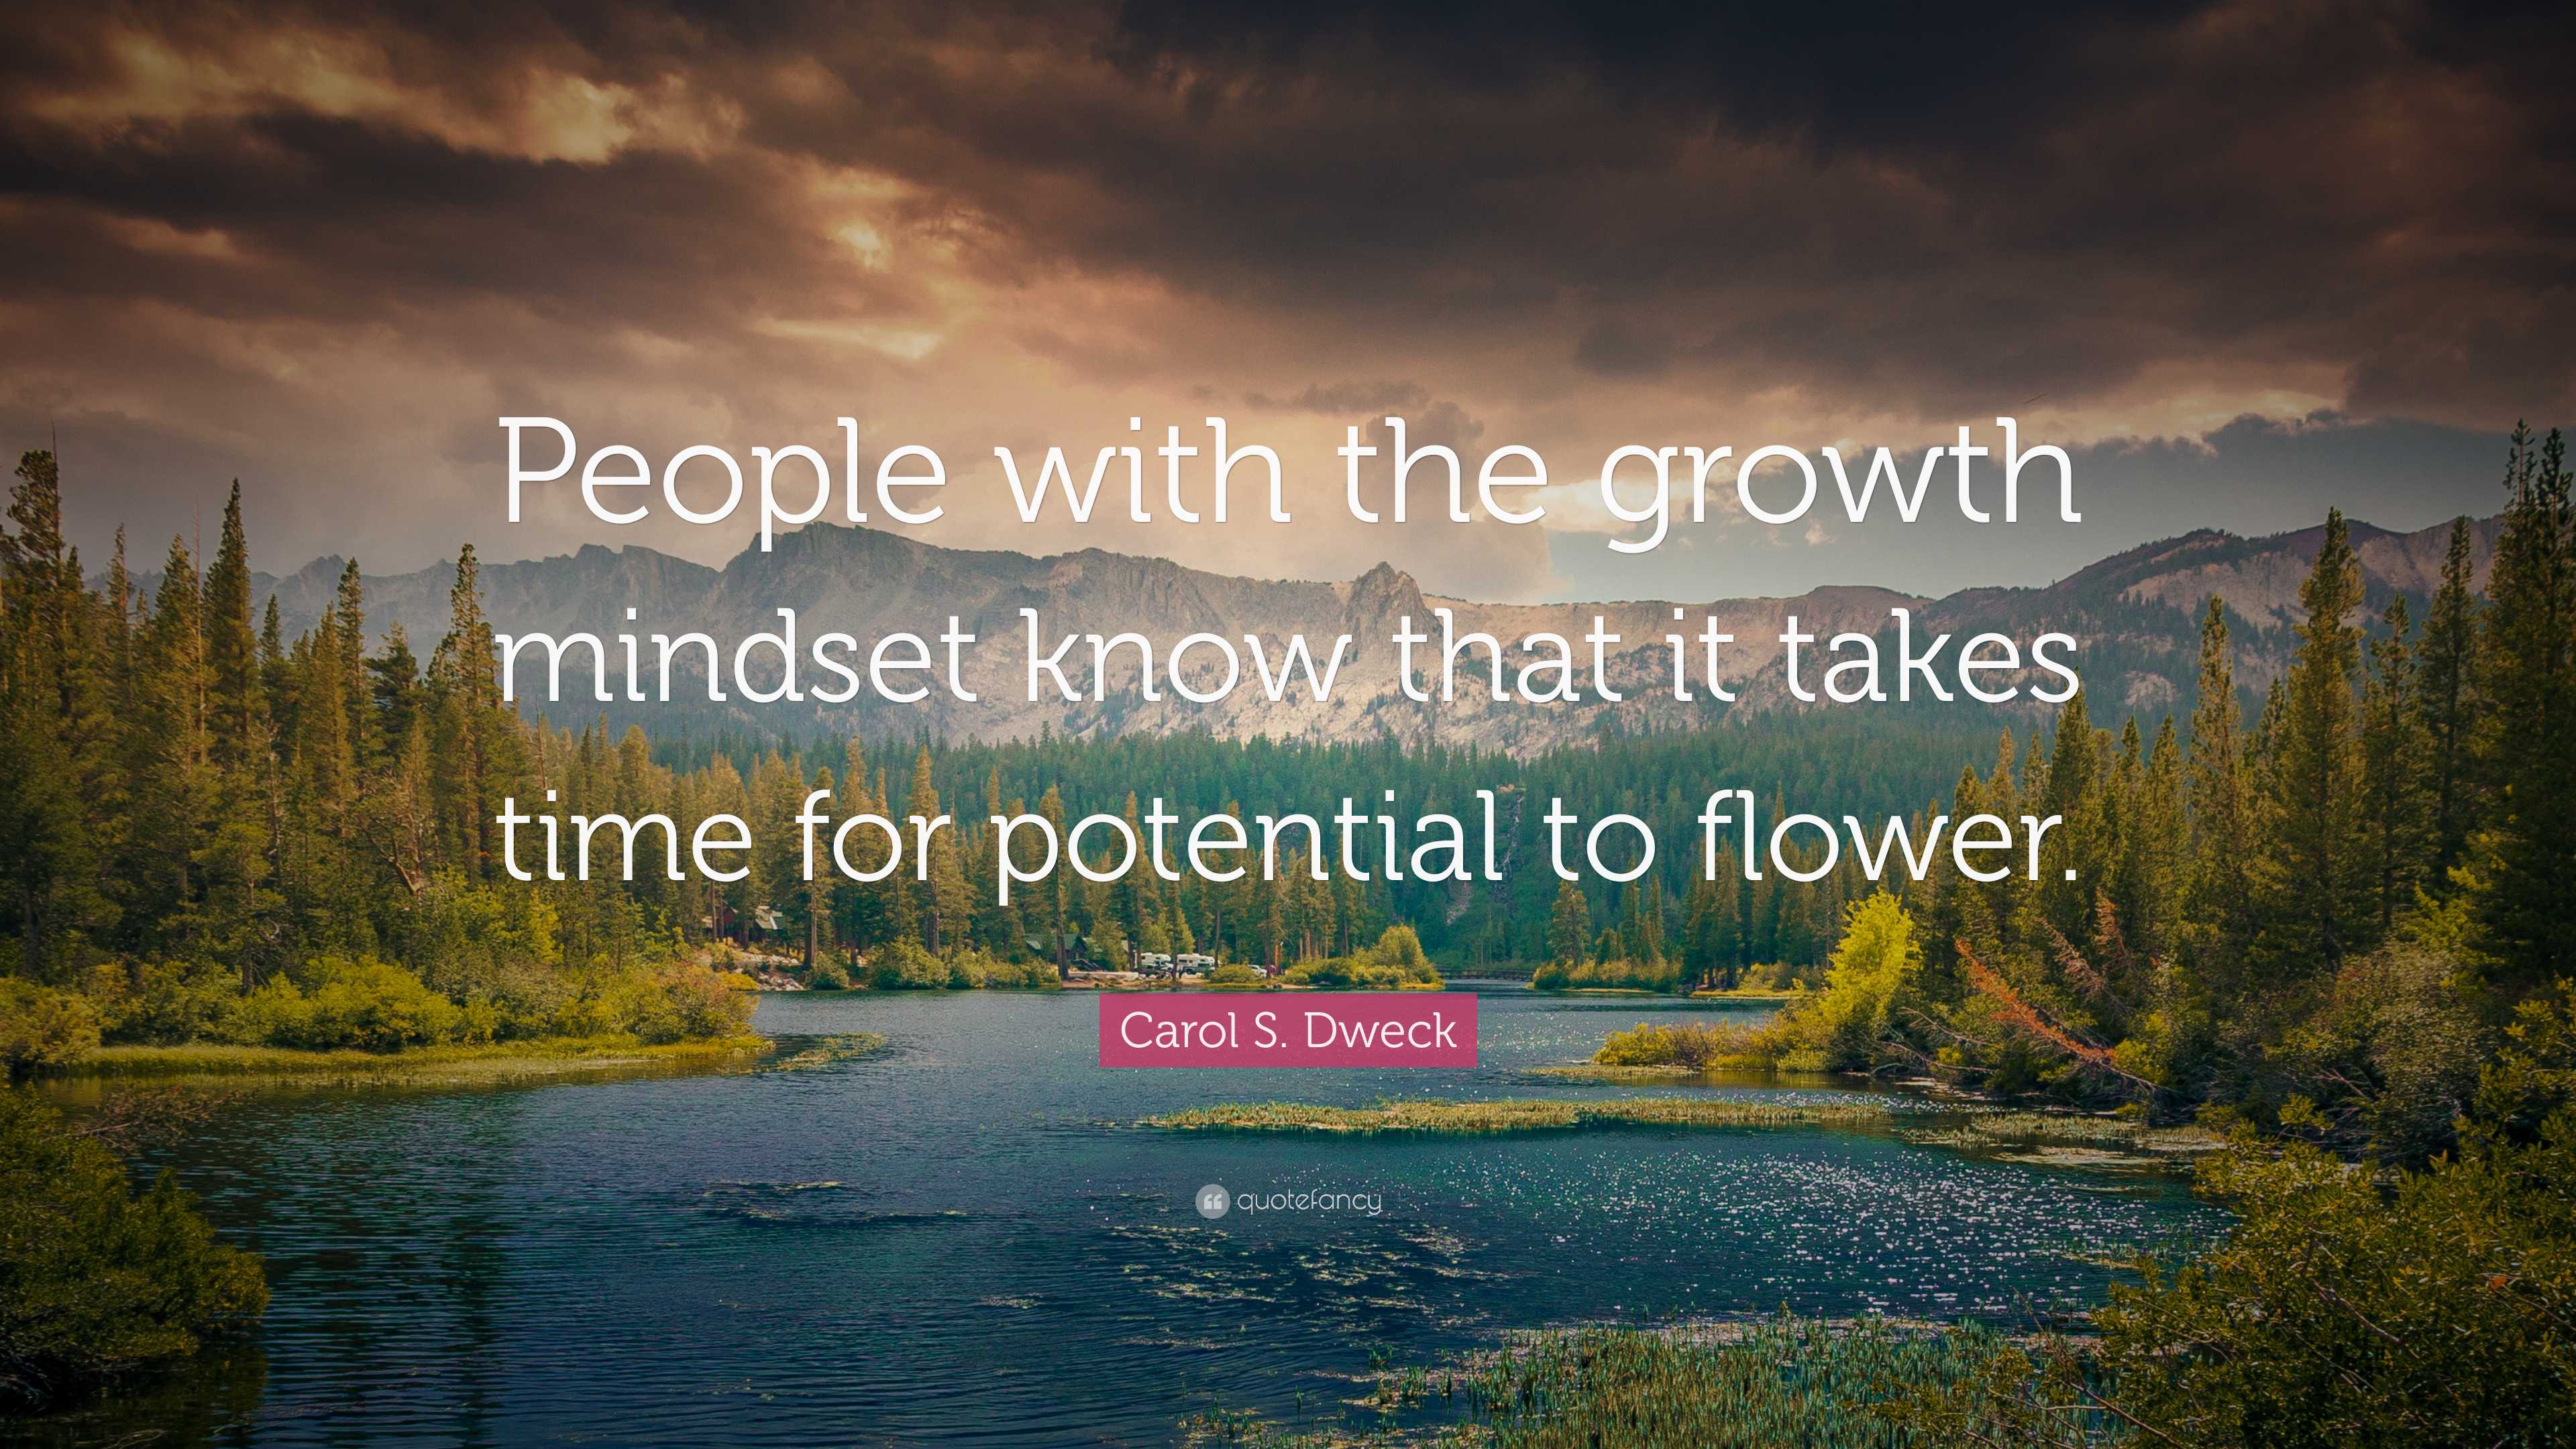 Growth Mindset Quotes From Carol Dweck  DEVELOPMENT ZONE®. PCA Resource  Center